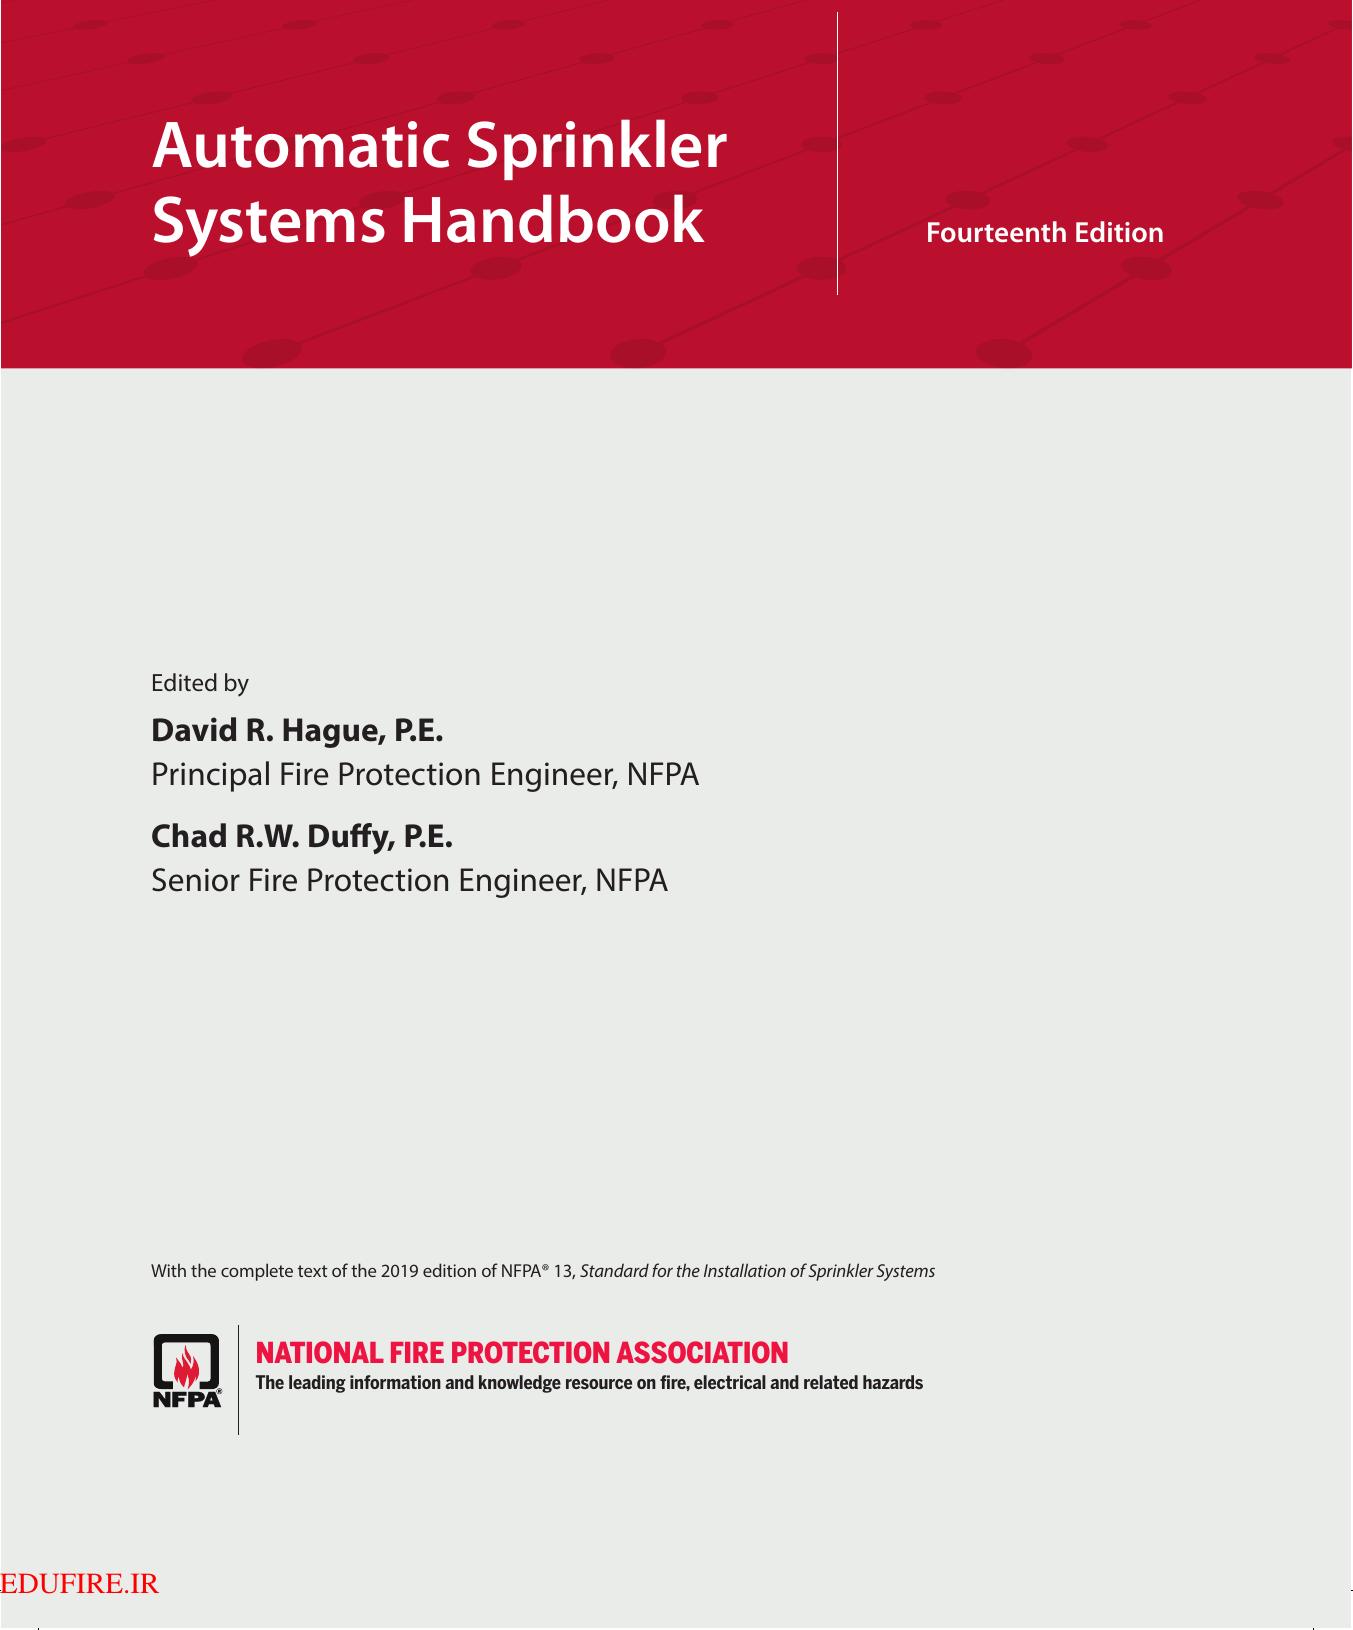 NFPA 13: Automatic Sprinkler Systems Handbook, 2019 Edition by National Fire Protection Association